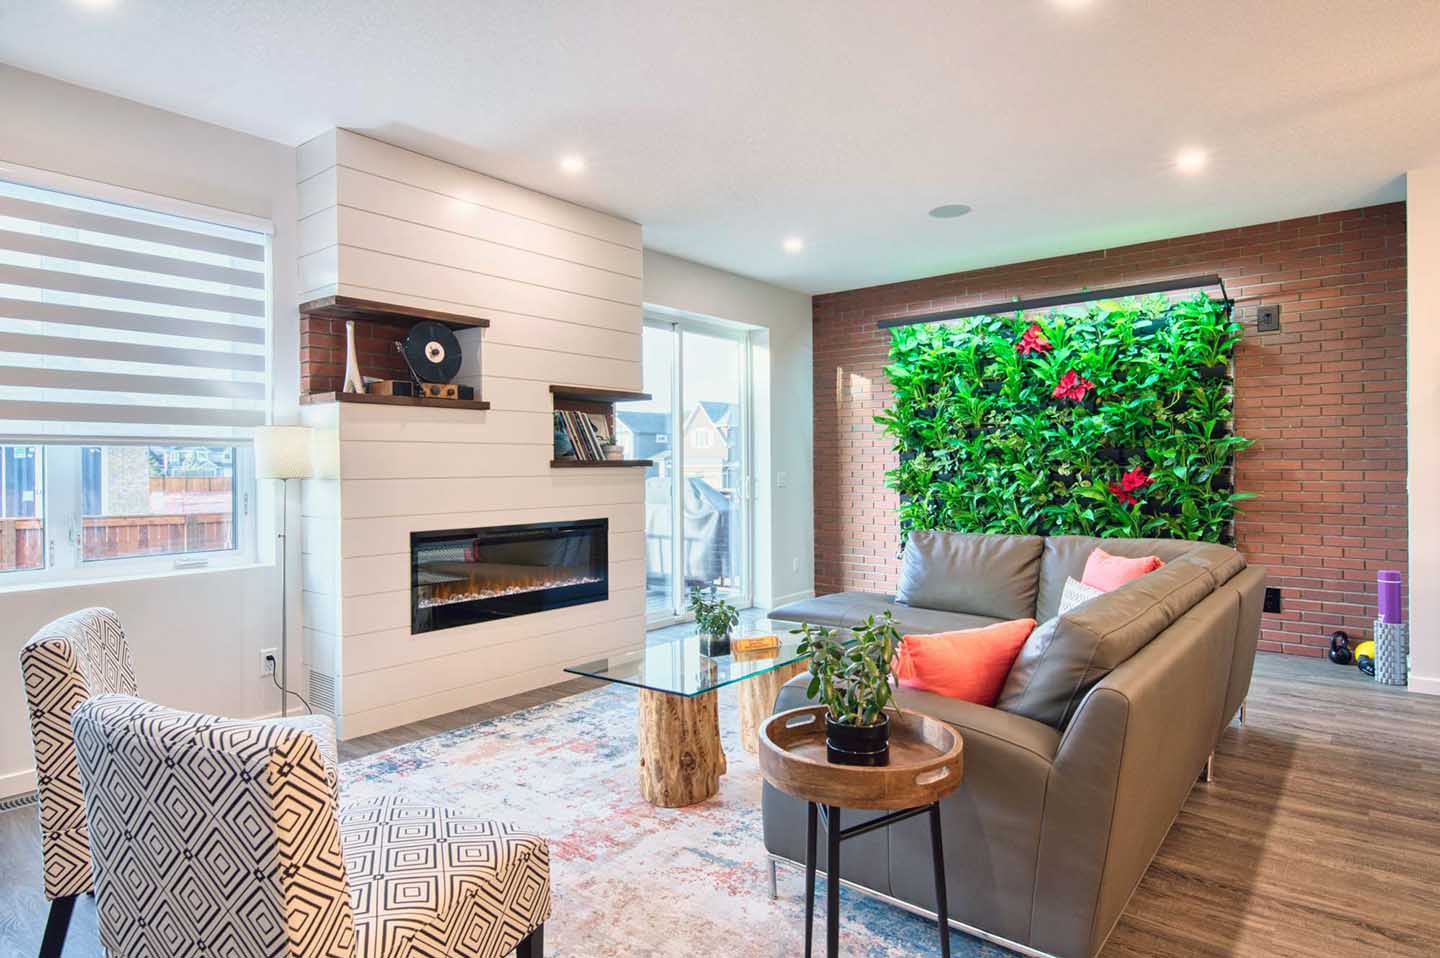 Beautiful living room with windows and patio sliding doors. A gas fireplace and living wall with green plants also featured in this beautiful net zero home.